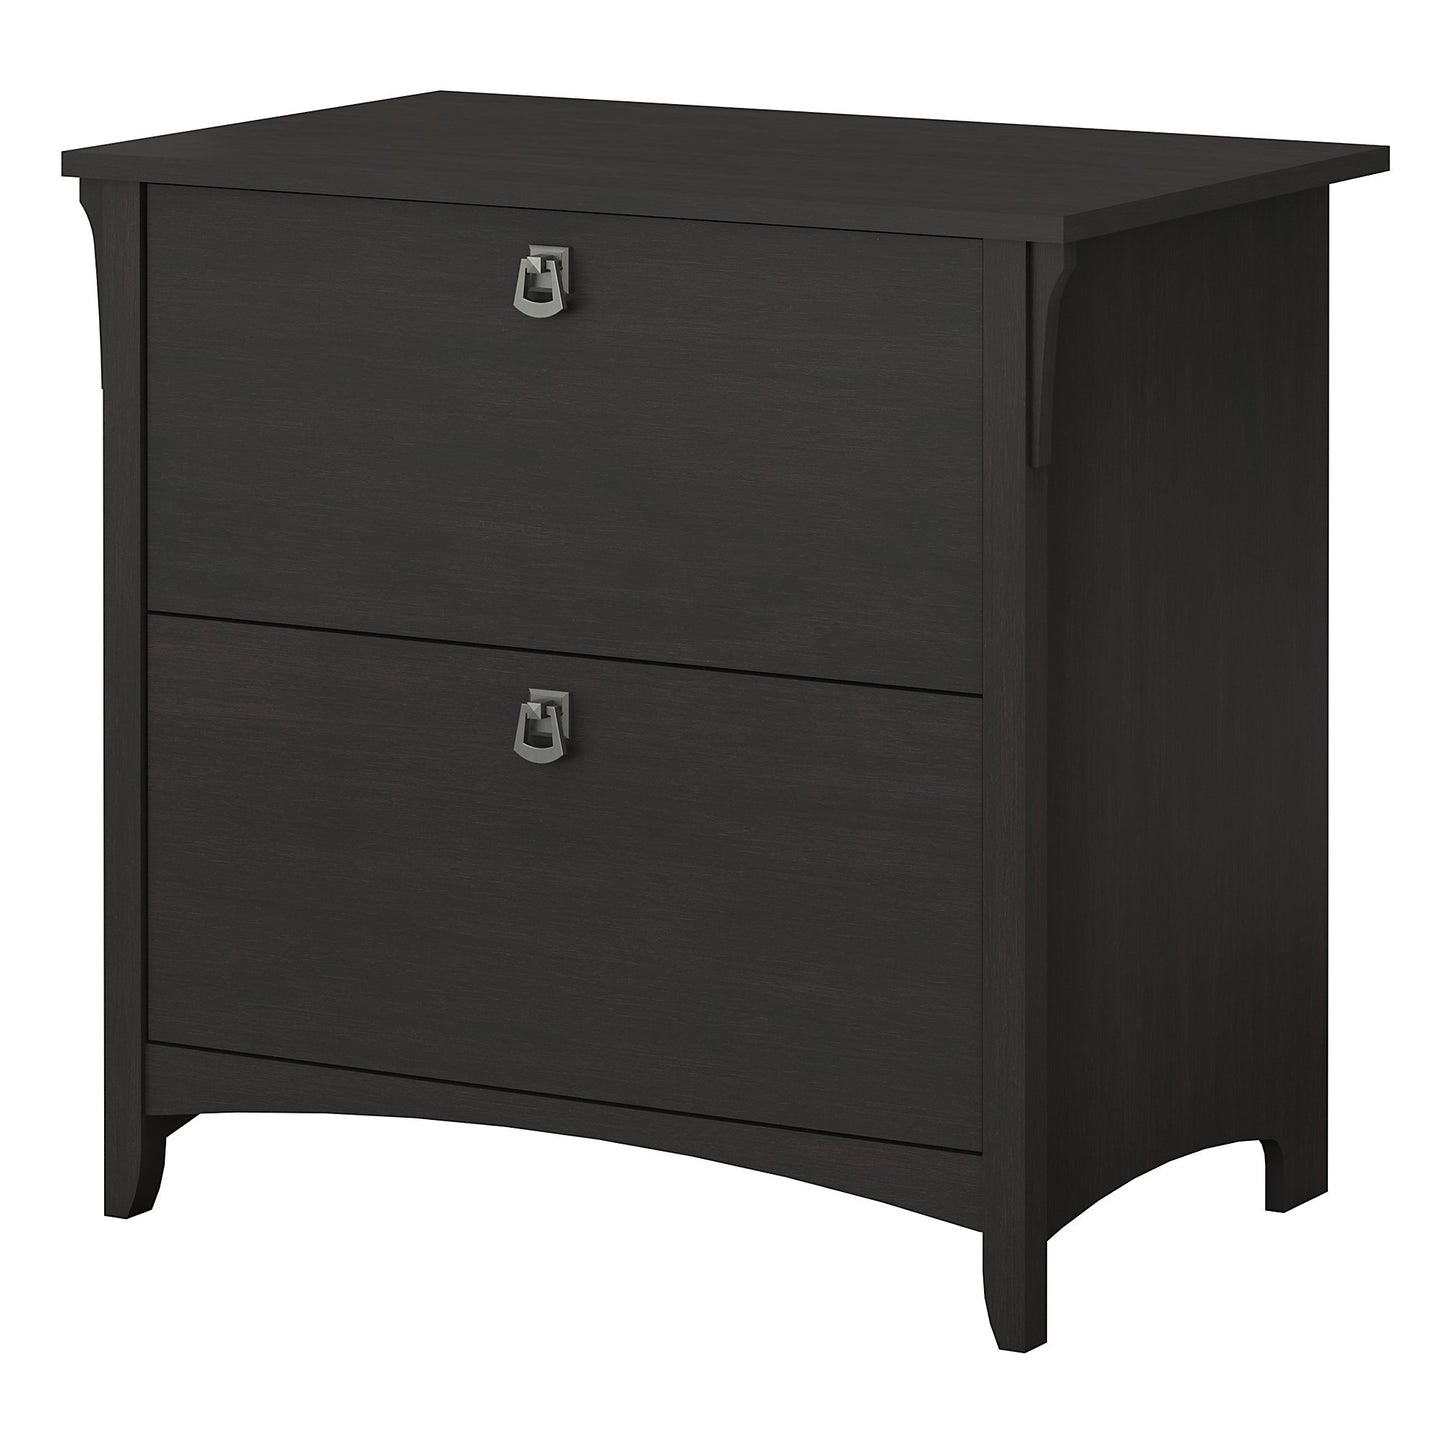 Bush Furniture Salinas 2 Drawer Lateral File Cabinet | Home Office Storage for Letter, Legal, and A4-Size Documents, Vintage Black